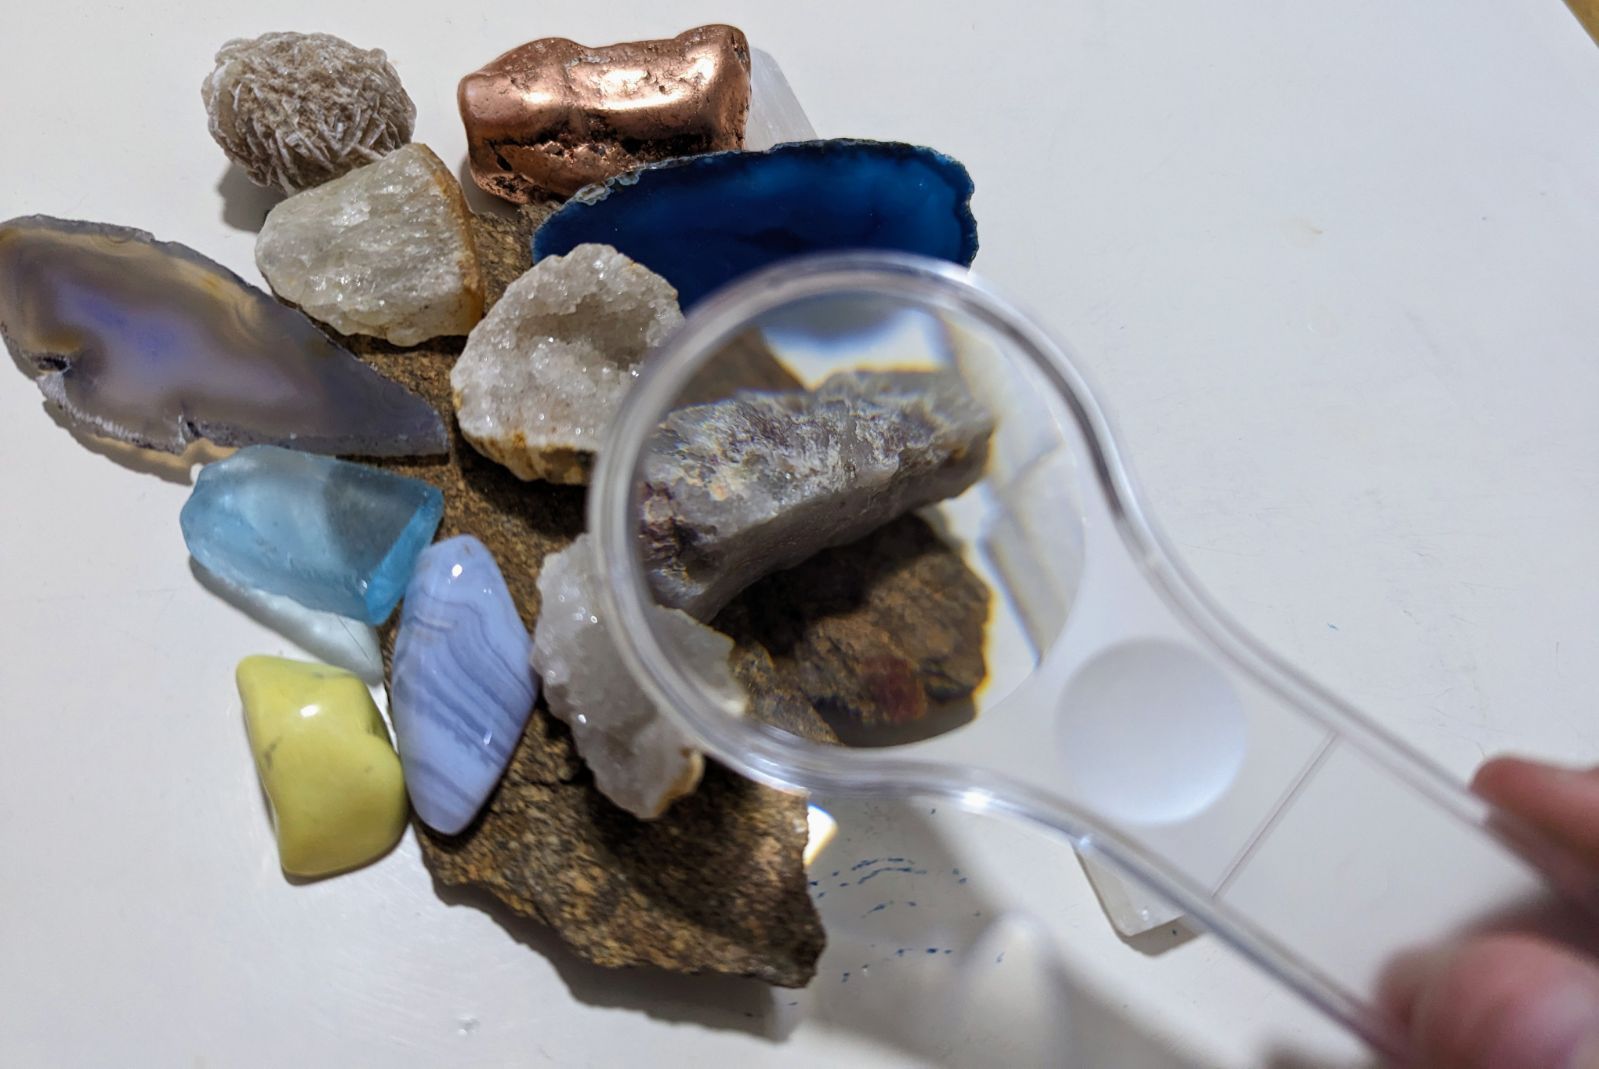 variety of colorful stones and a small handheld magnifying glass